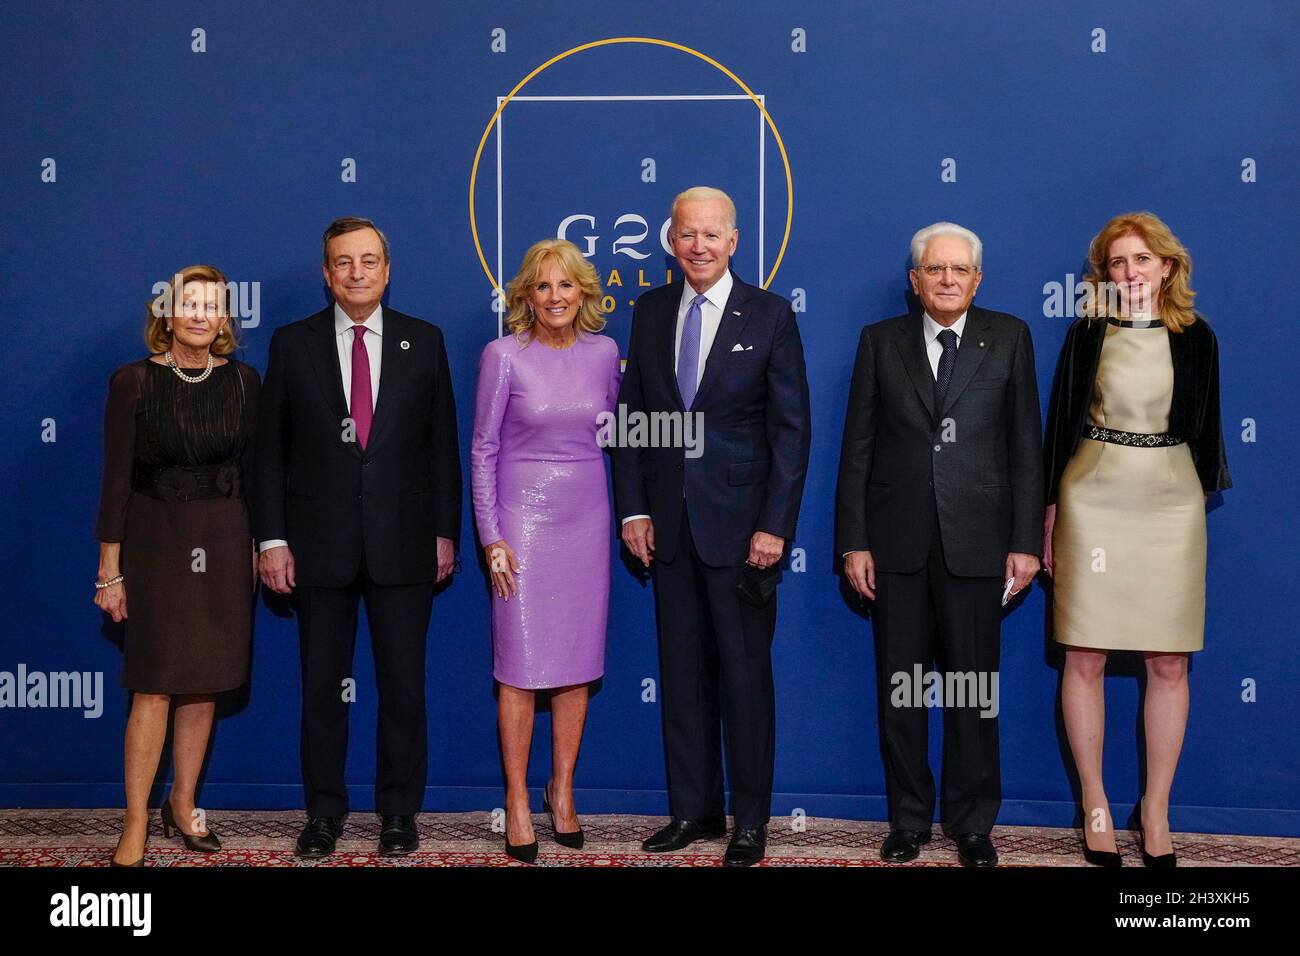 Rome, Italy. 30th Oct, 2021. U.S President Joe Biden and First Lady Jill Biden with Italian leaders hosting a dinner for world leaders during the G20 Summit at the Quirinale Palace October 30, 2021 in Rome, Italy. Standing from left to right are: Maria Serenella Cappello, Italian Prime Minister Mario Draghi, First Lady Jill Biden, U.S. President Joe Biden, Italian President Sergio Mattarella and daughter Laura Mattarella. Credit: Adam Schultz/White House Photo/Alamy Live News Stock Photo